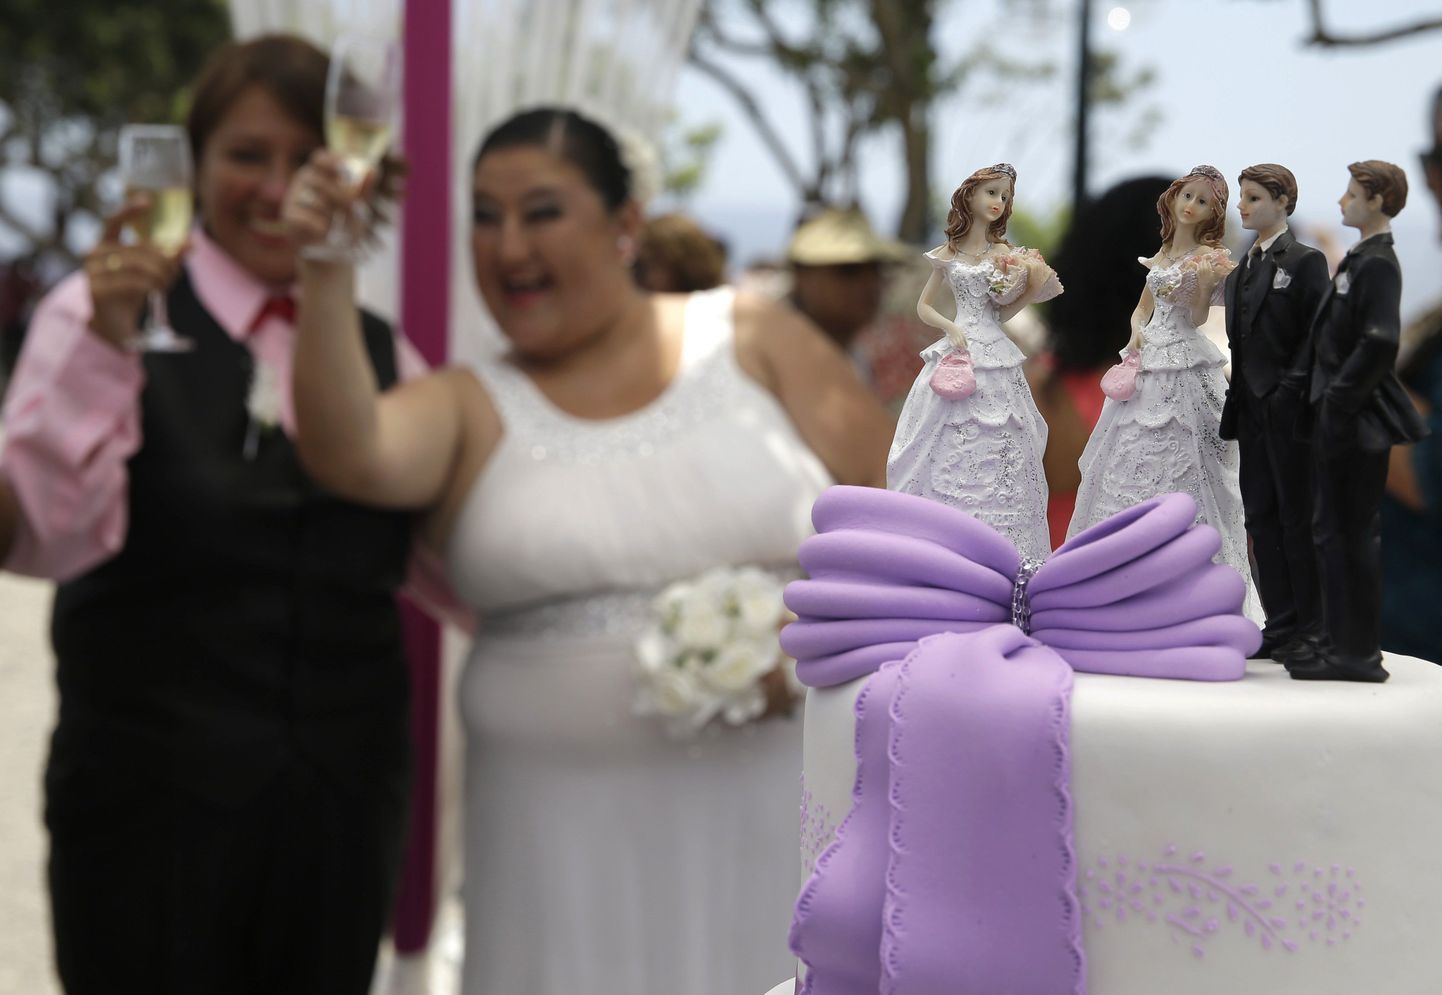 Members of the Lesbian, Gay, Transexual and Bisexual, LGTB, community, Marleni, right, and Diana make a toast after their symbolic marriage on Valentine's Day in Lima, Peru, Tuesday, Feb. 14, 2017. About 10 couples of the LGTB community attended a symbolic marriages ceremony to demand equal rights. (AP Photo/Martin Mejia)